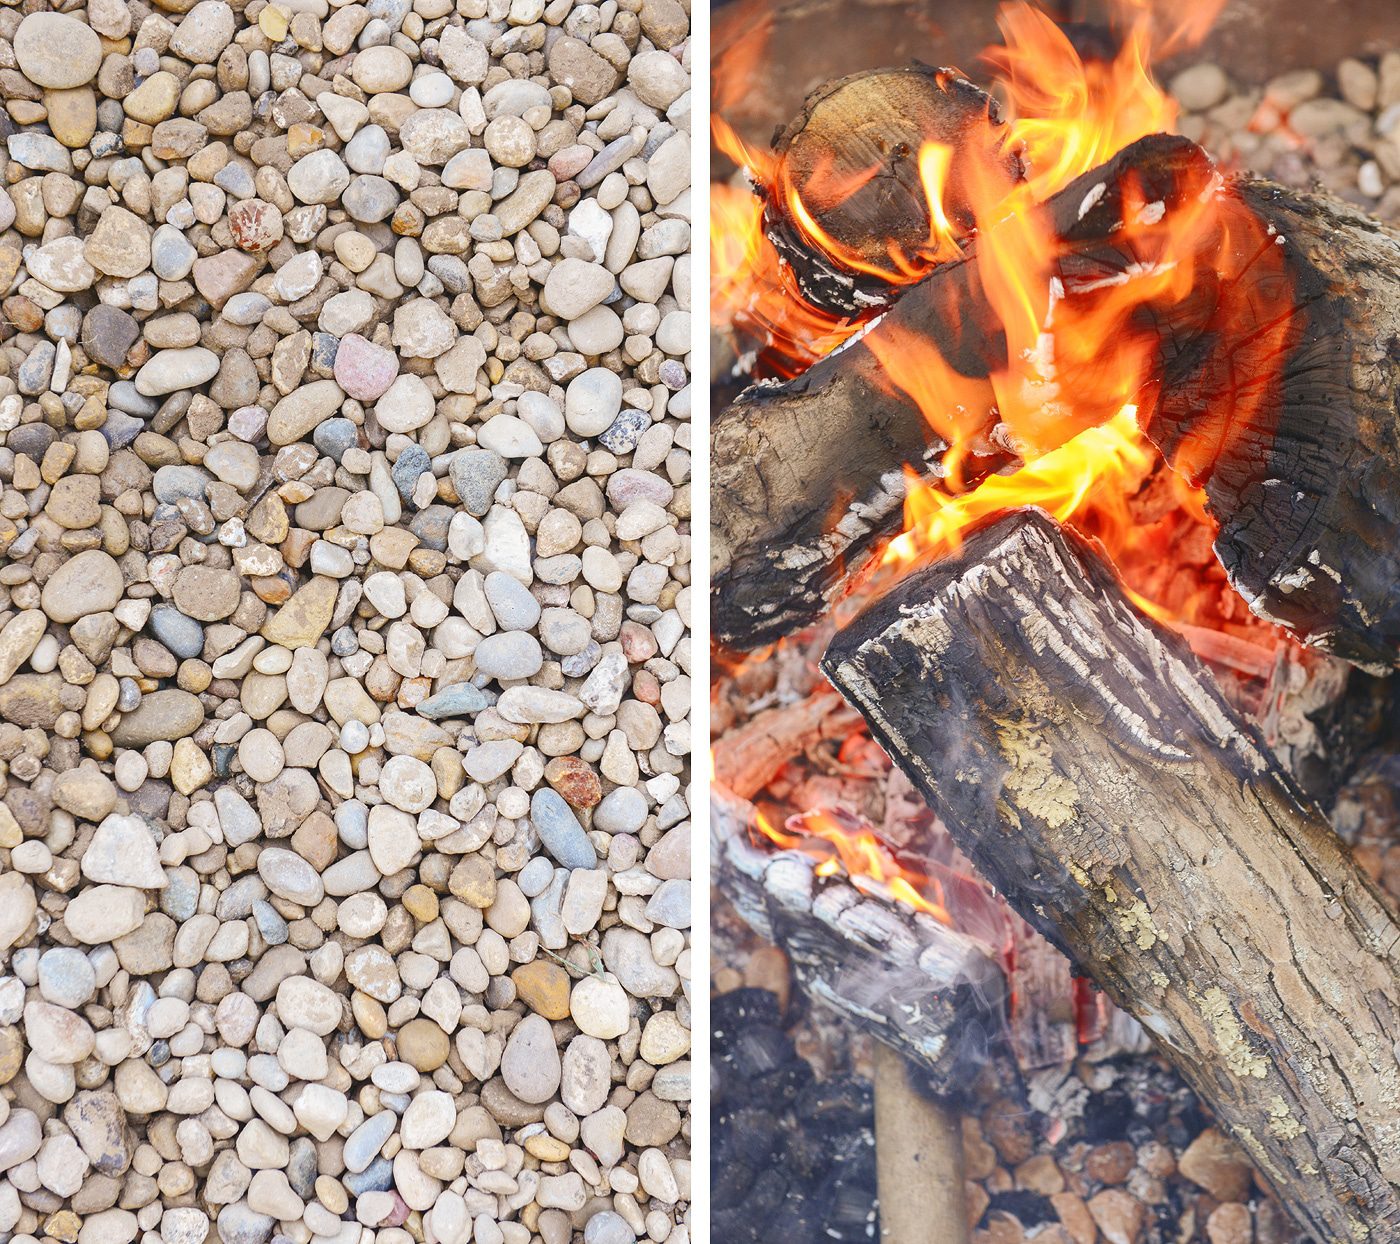 How to make a fire pit // DIY fire pit // via Yellow Brick Home